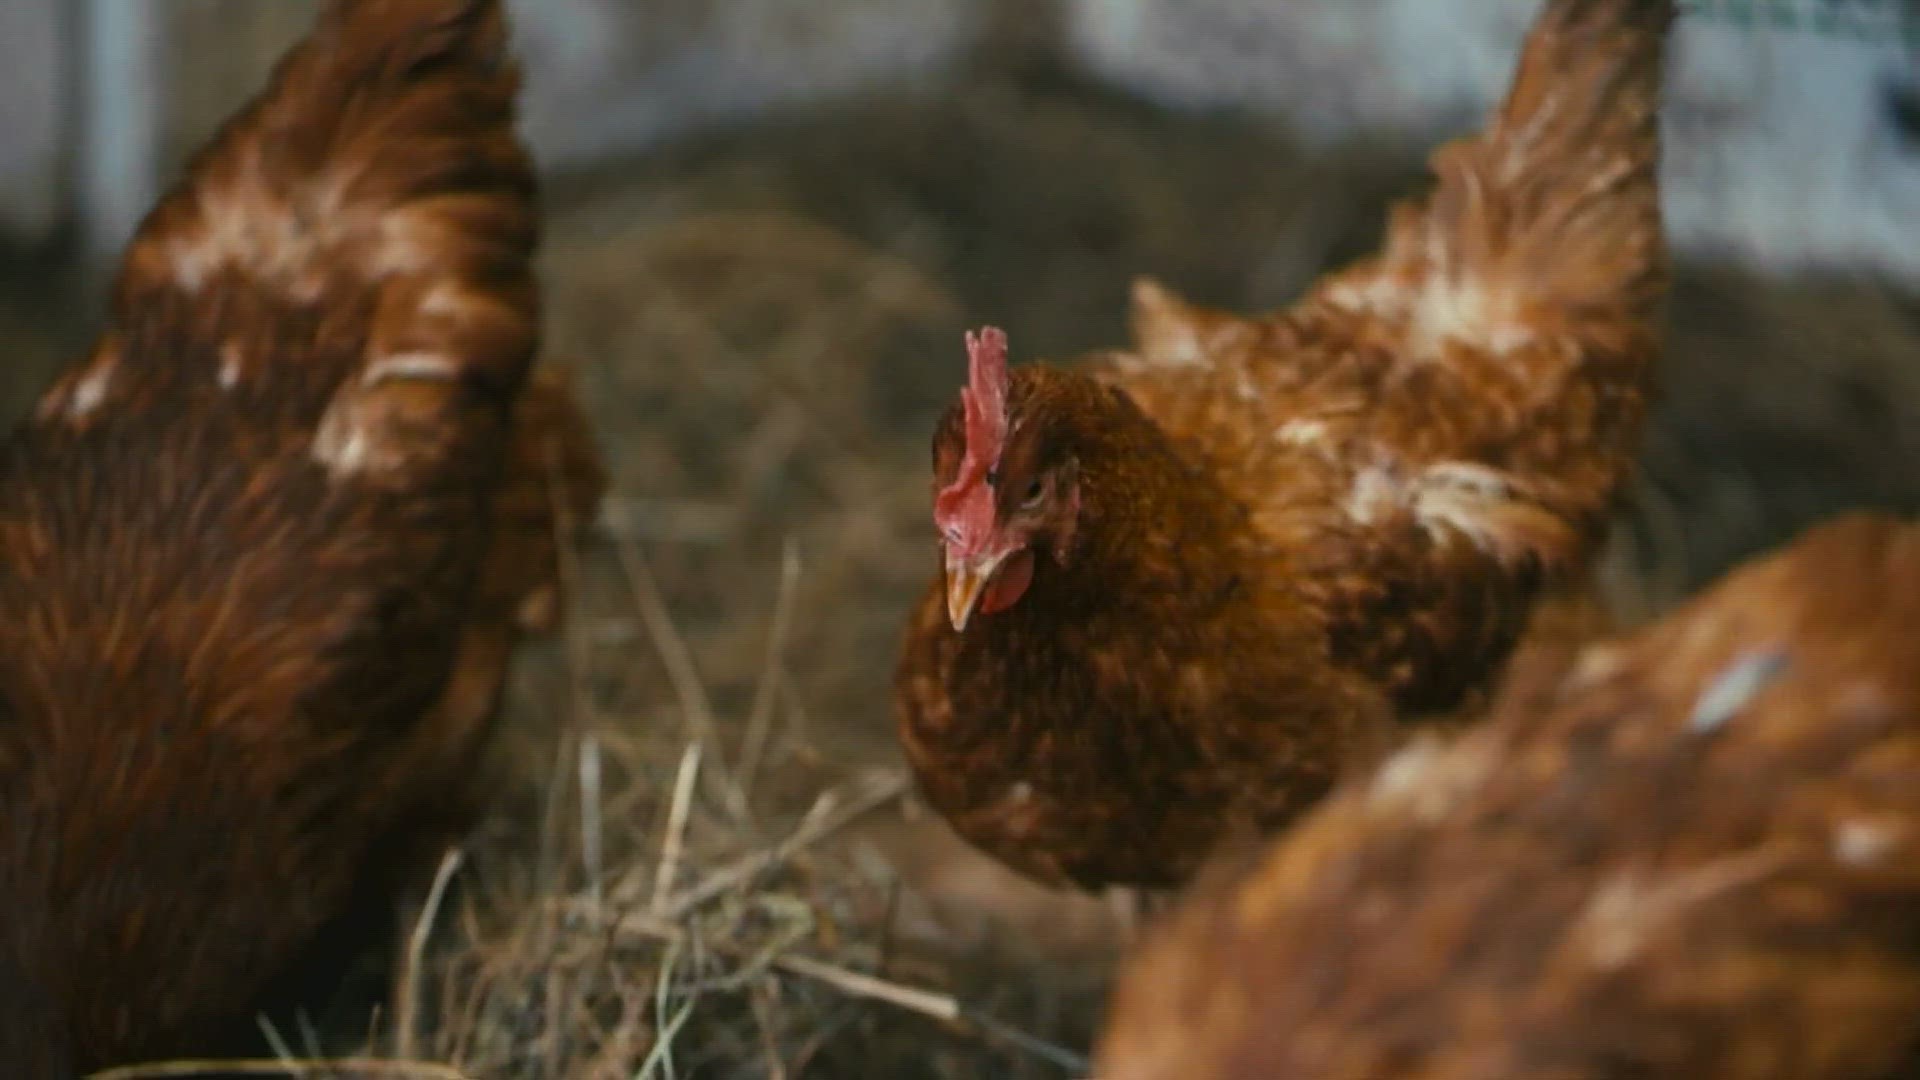 Egg shortages arise as millions of chickens lost to bird flu in California